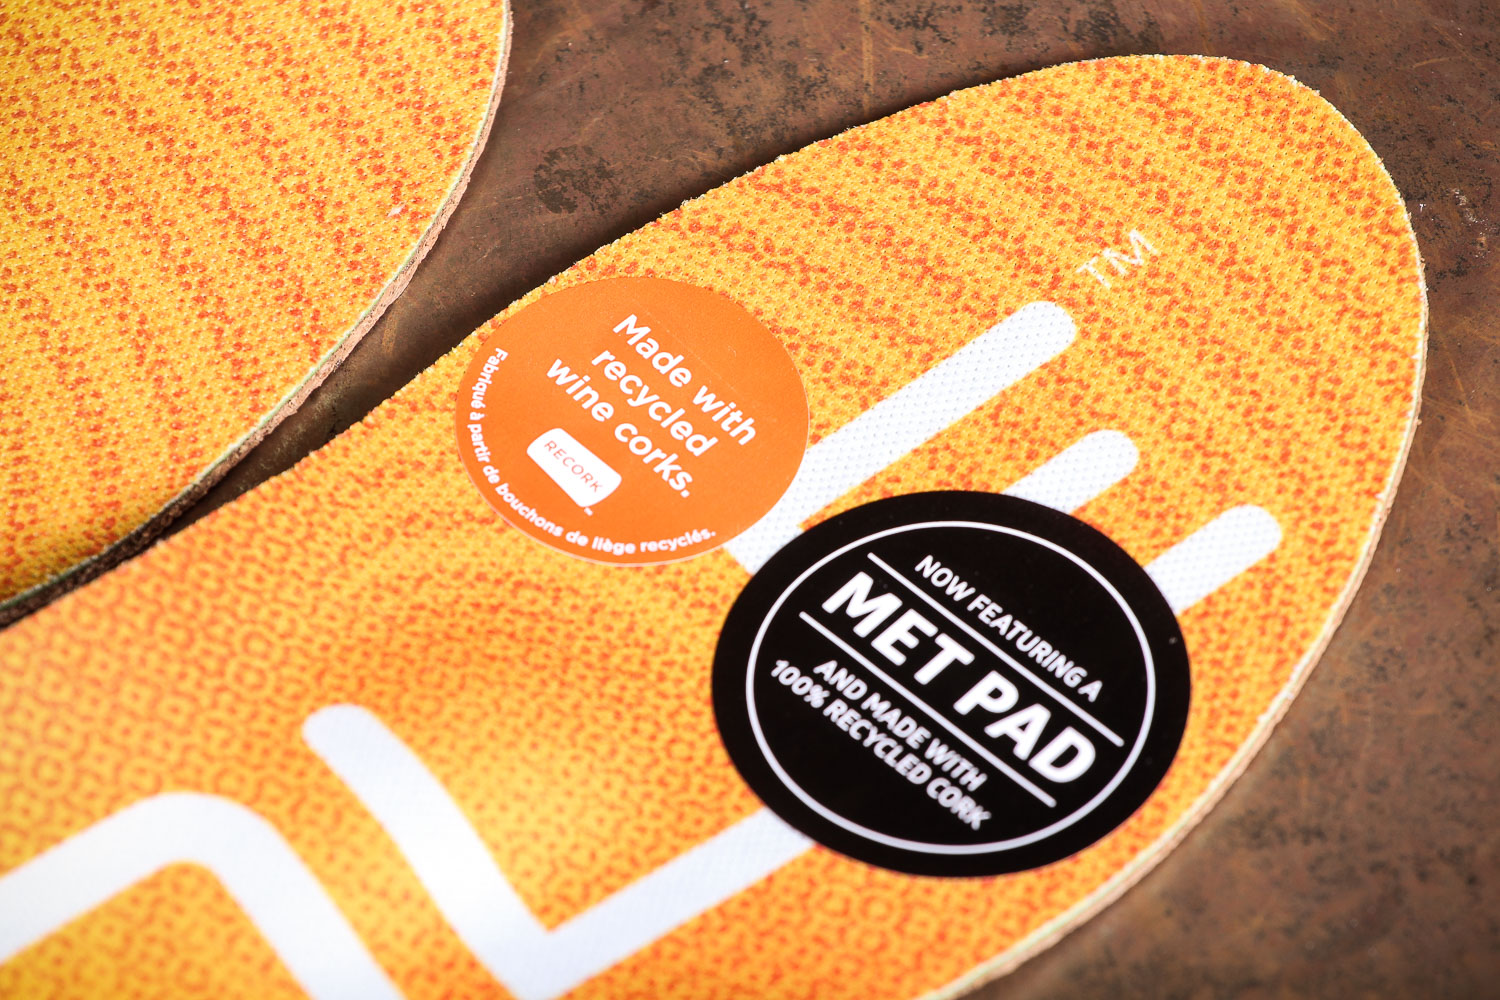 sole active insole with met pad